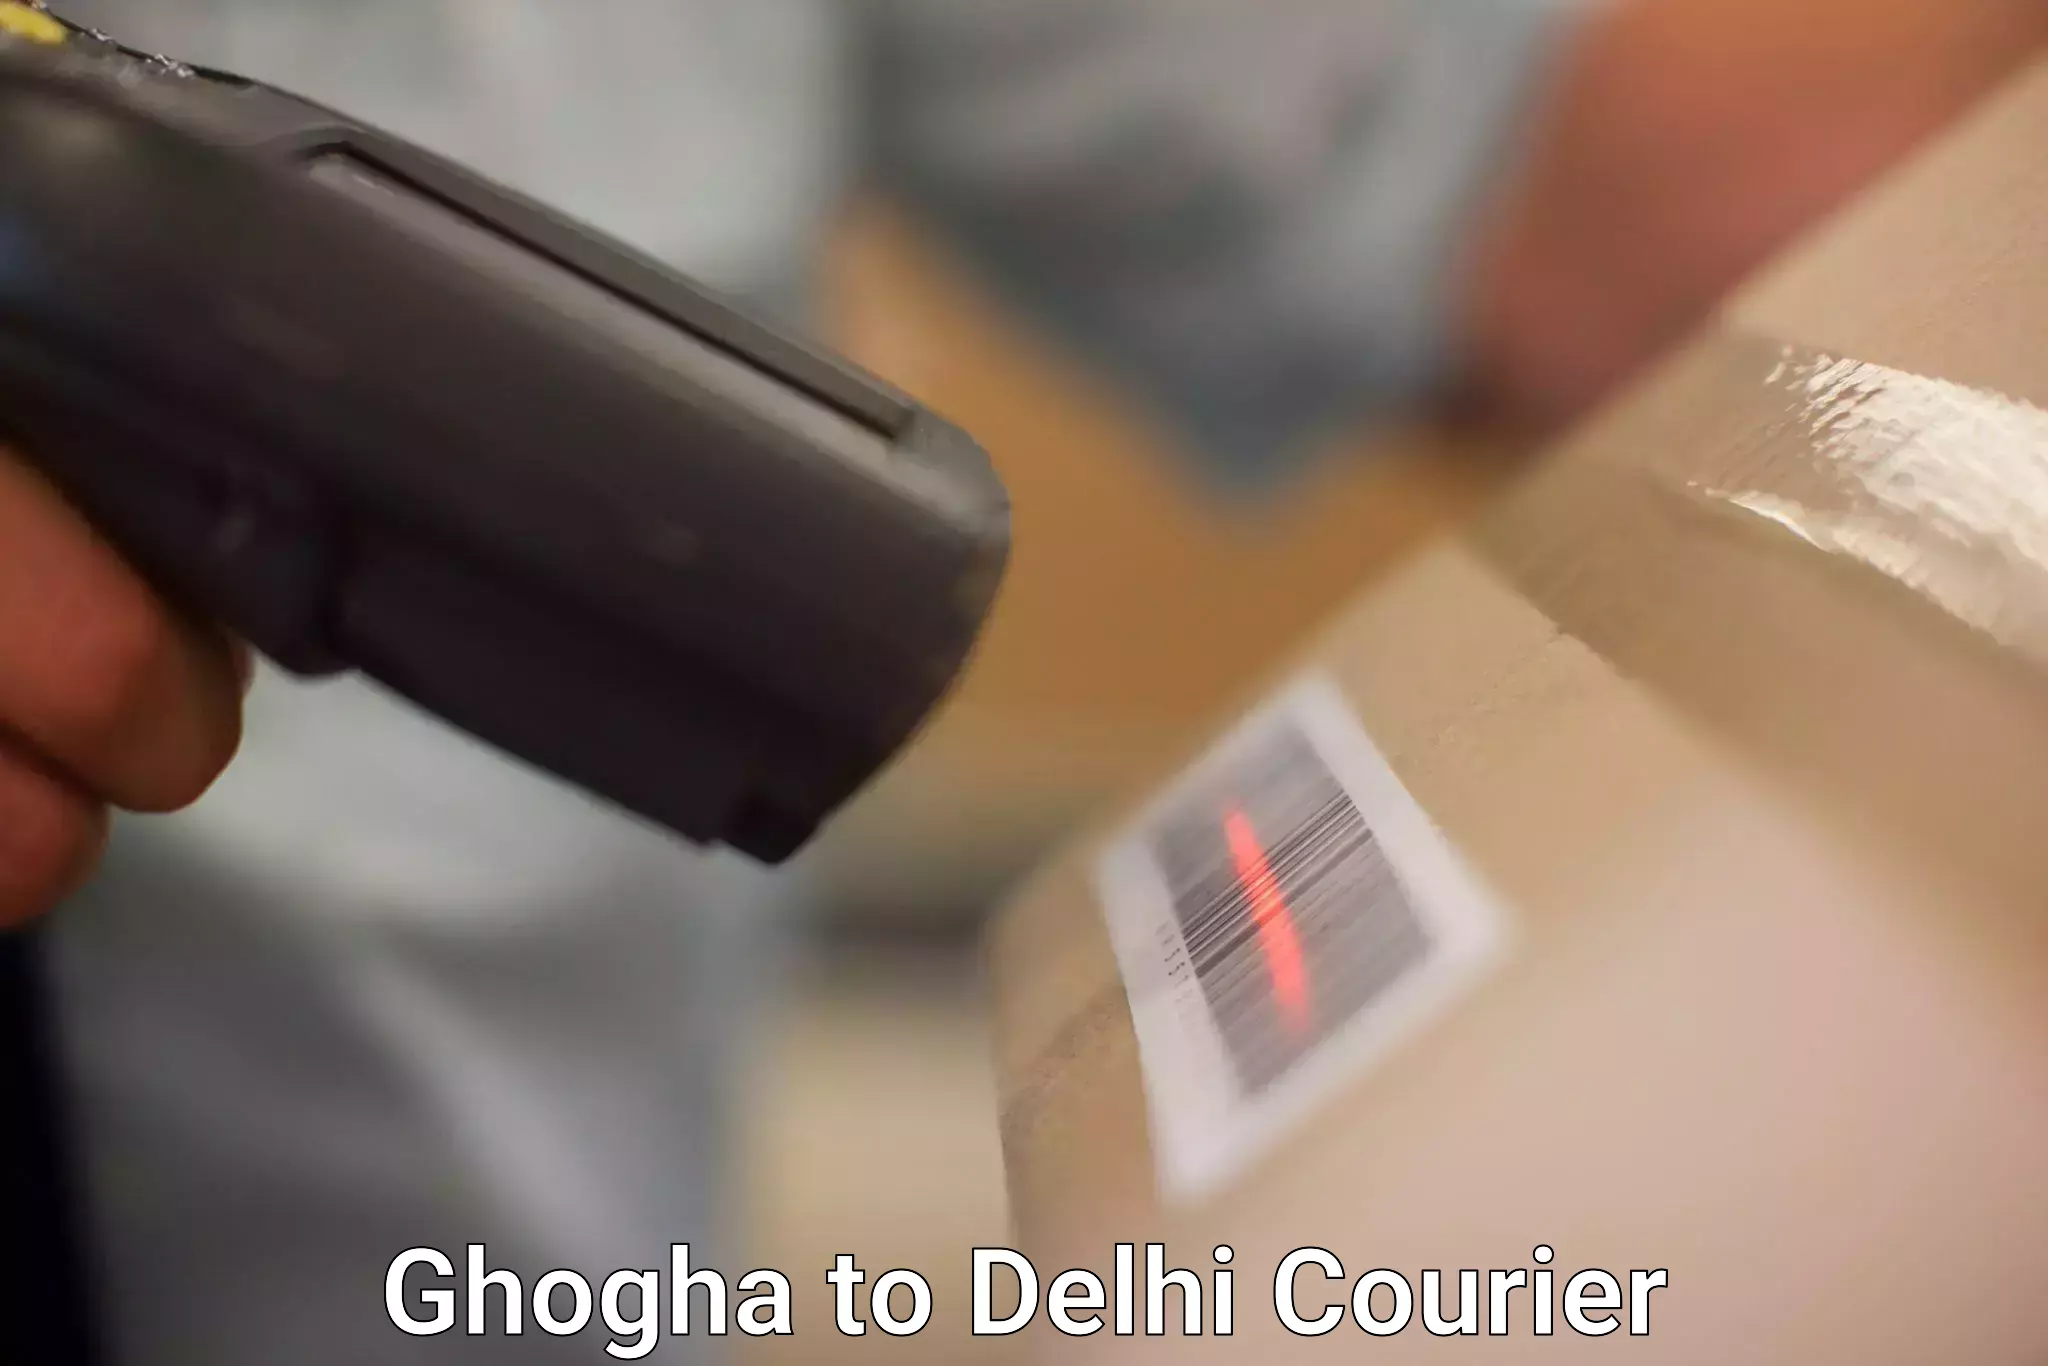 On-demand courier Ghogha to East Delhi